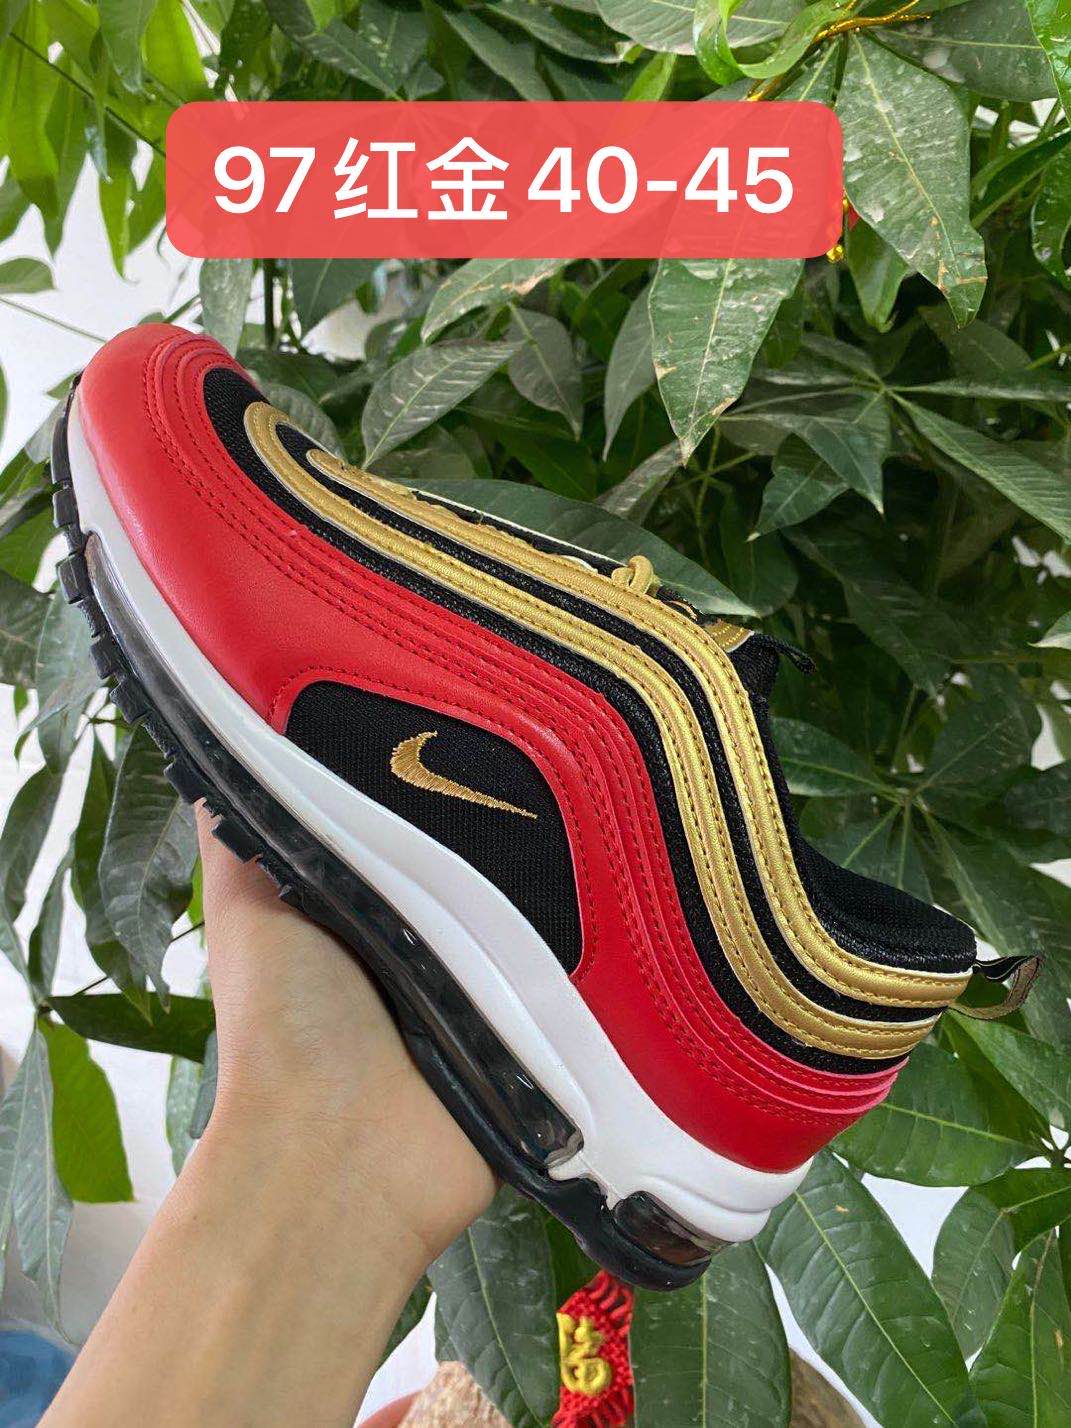 2020 Nike Air Max 97 Red Gold Black Shoes